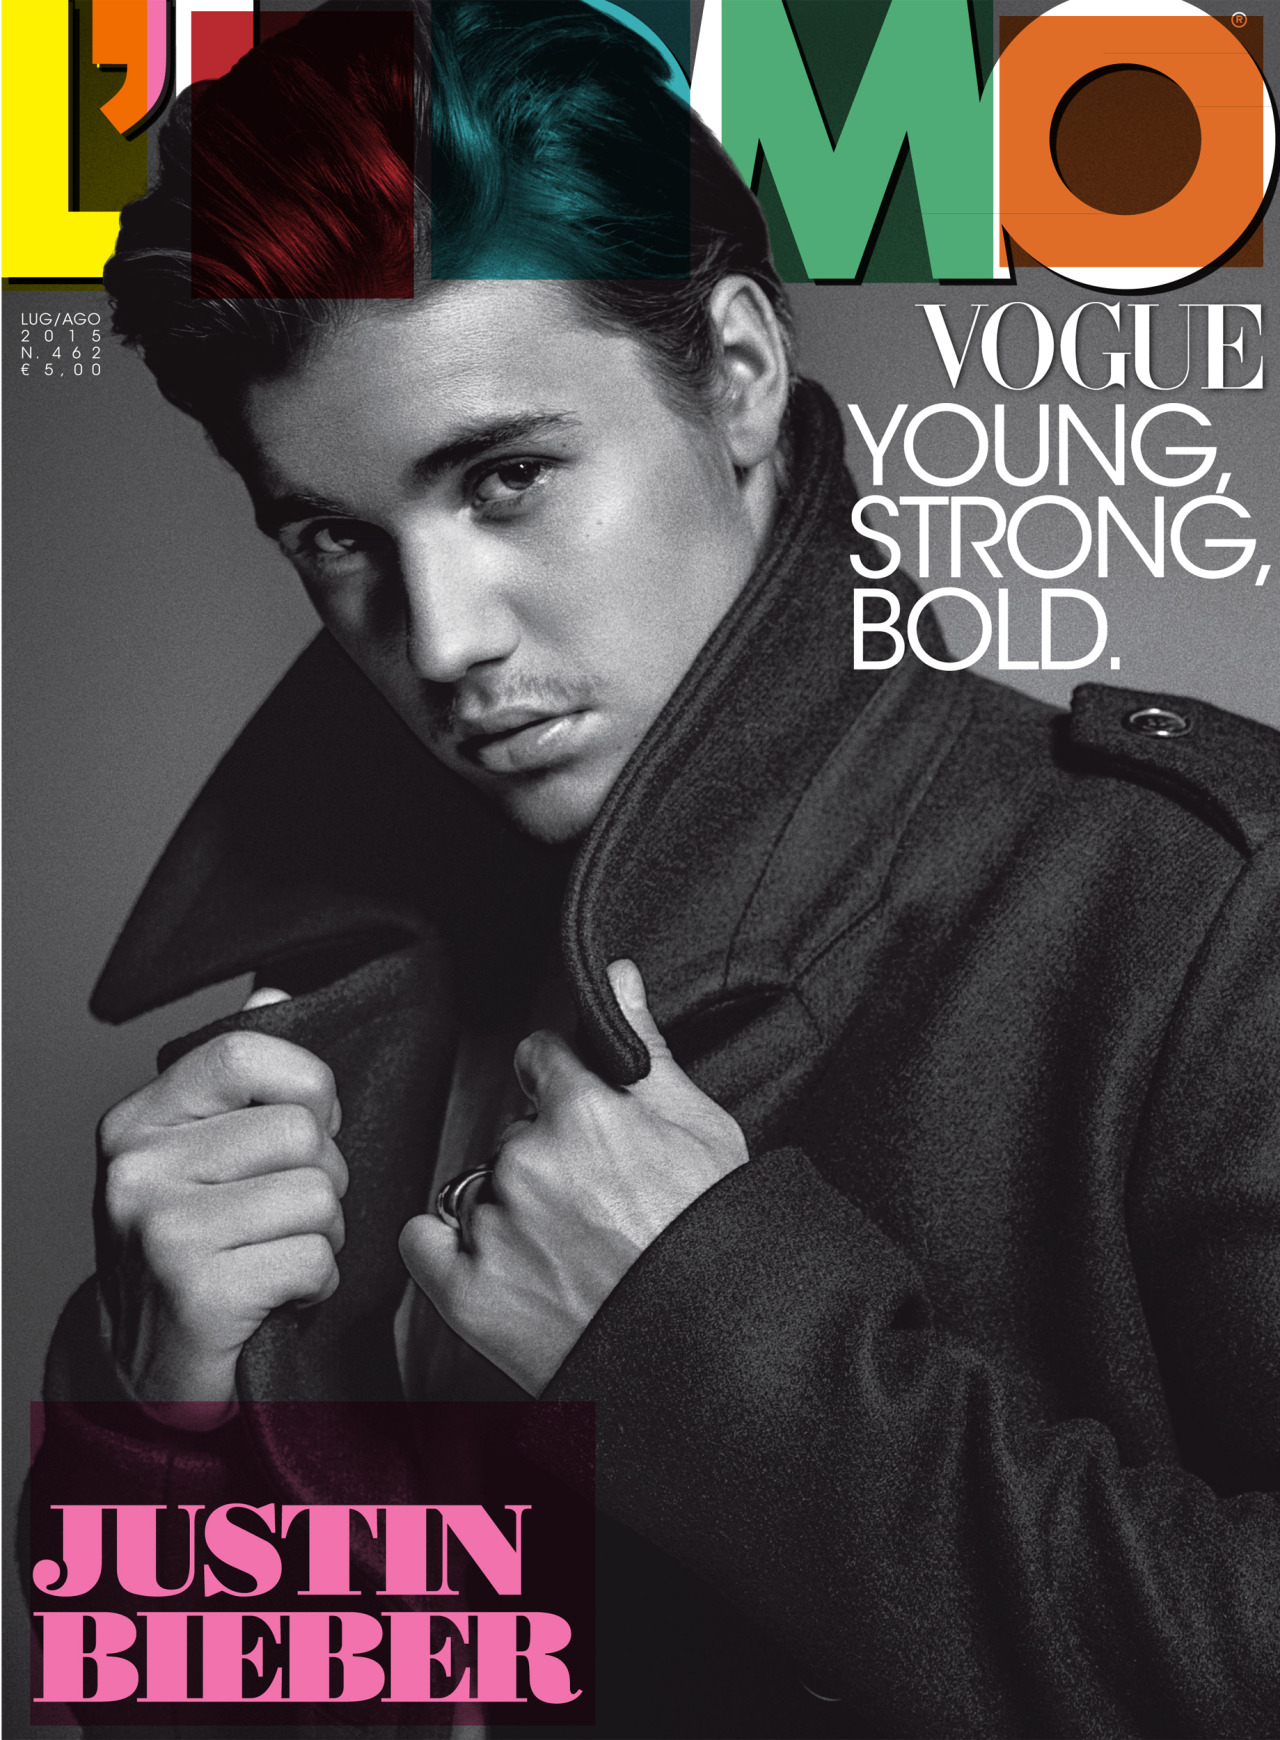 Justin Bieber Has Coat Moment for L'Uomo Vogue July/August 2015 Cover Shoot